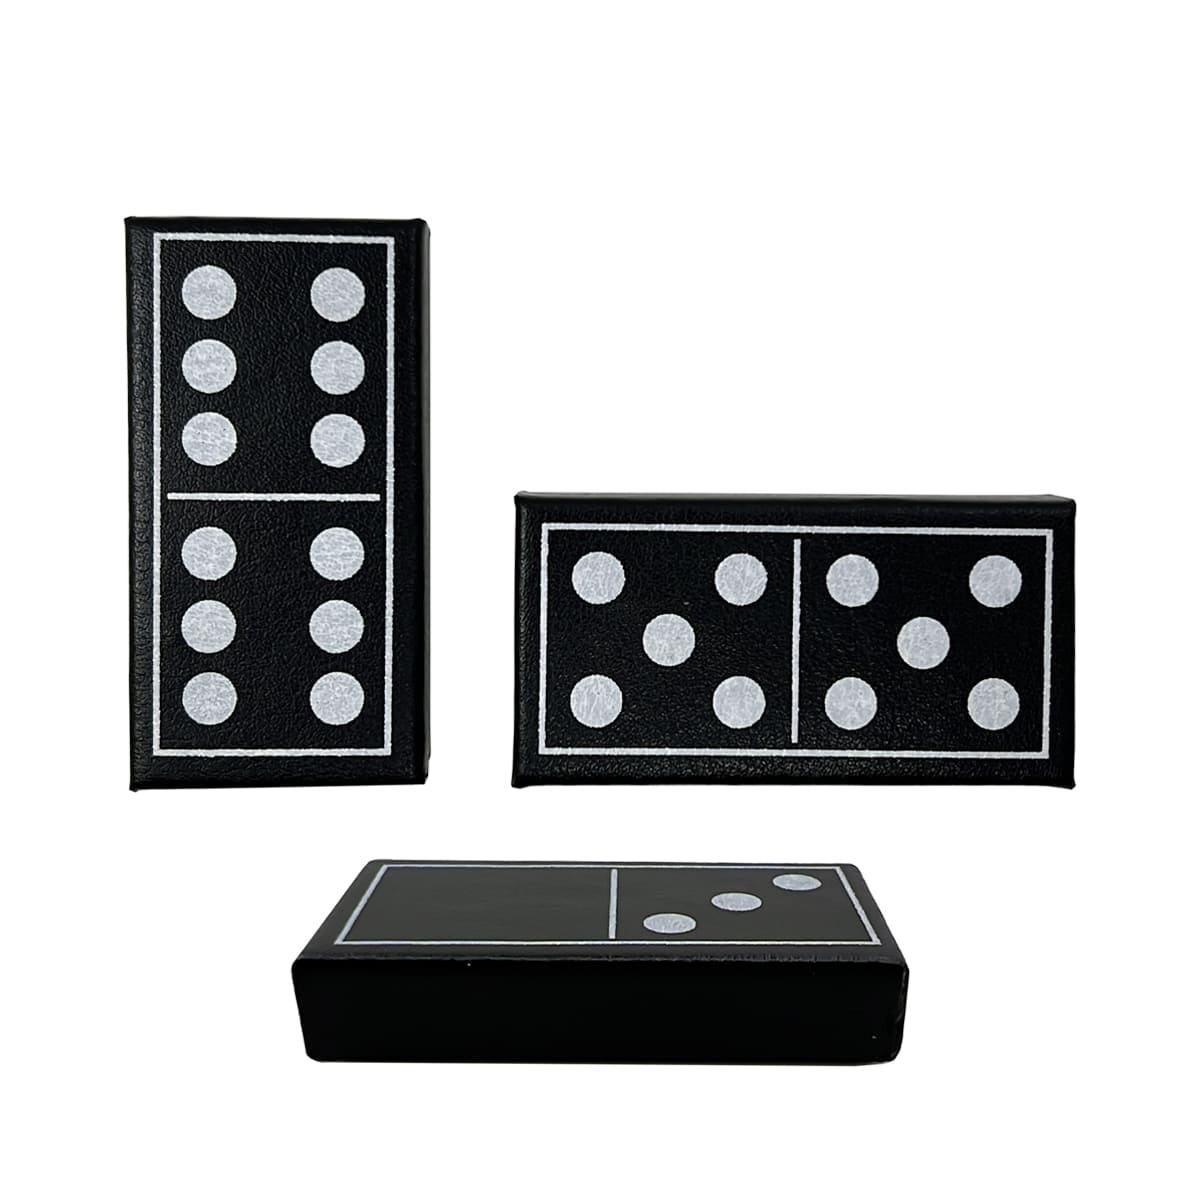 Luxury Domino Sets Double Six Standard 28 Tiles with Black Leather Case